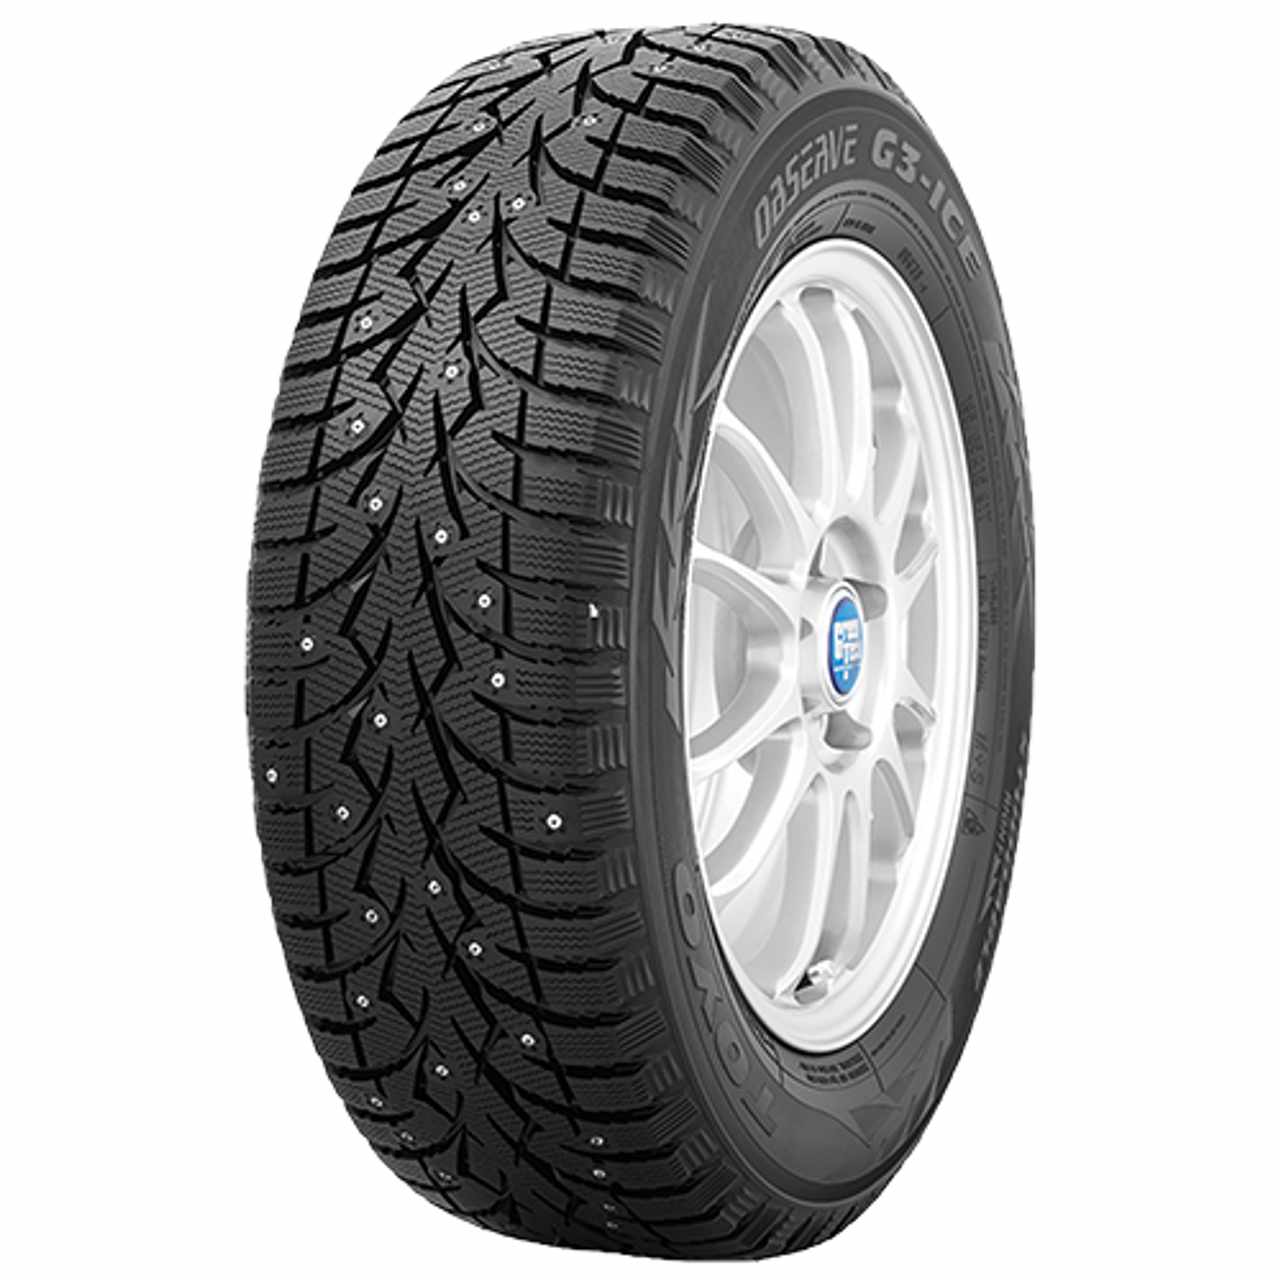 TOYO OBSERVE G3-ICE 275/60R20 115T BSW